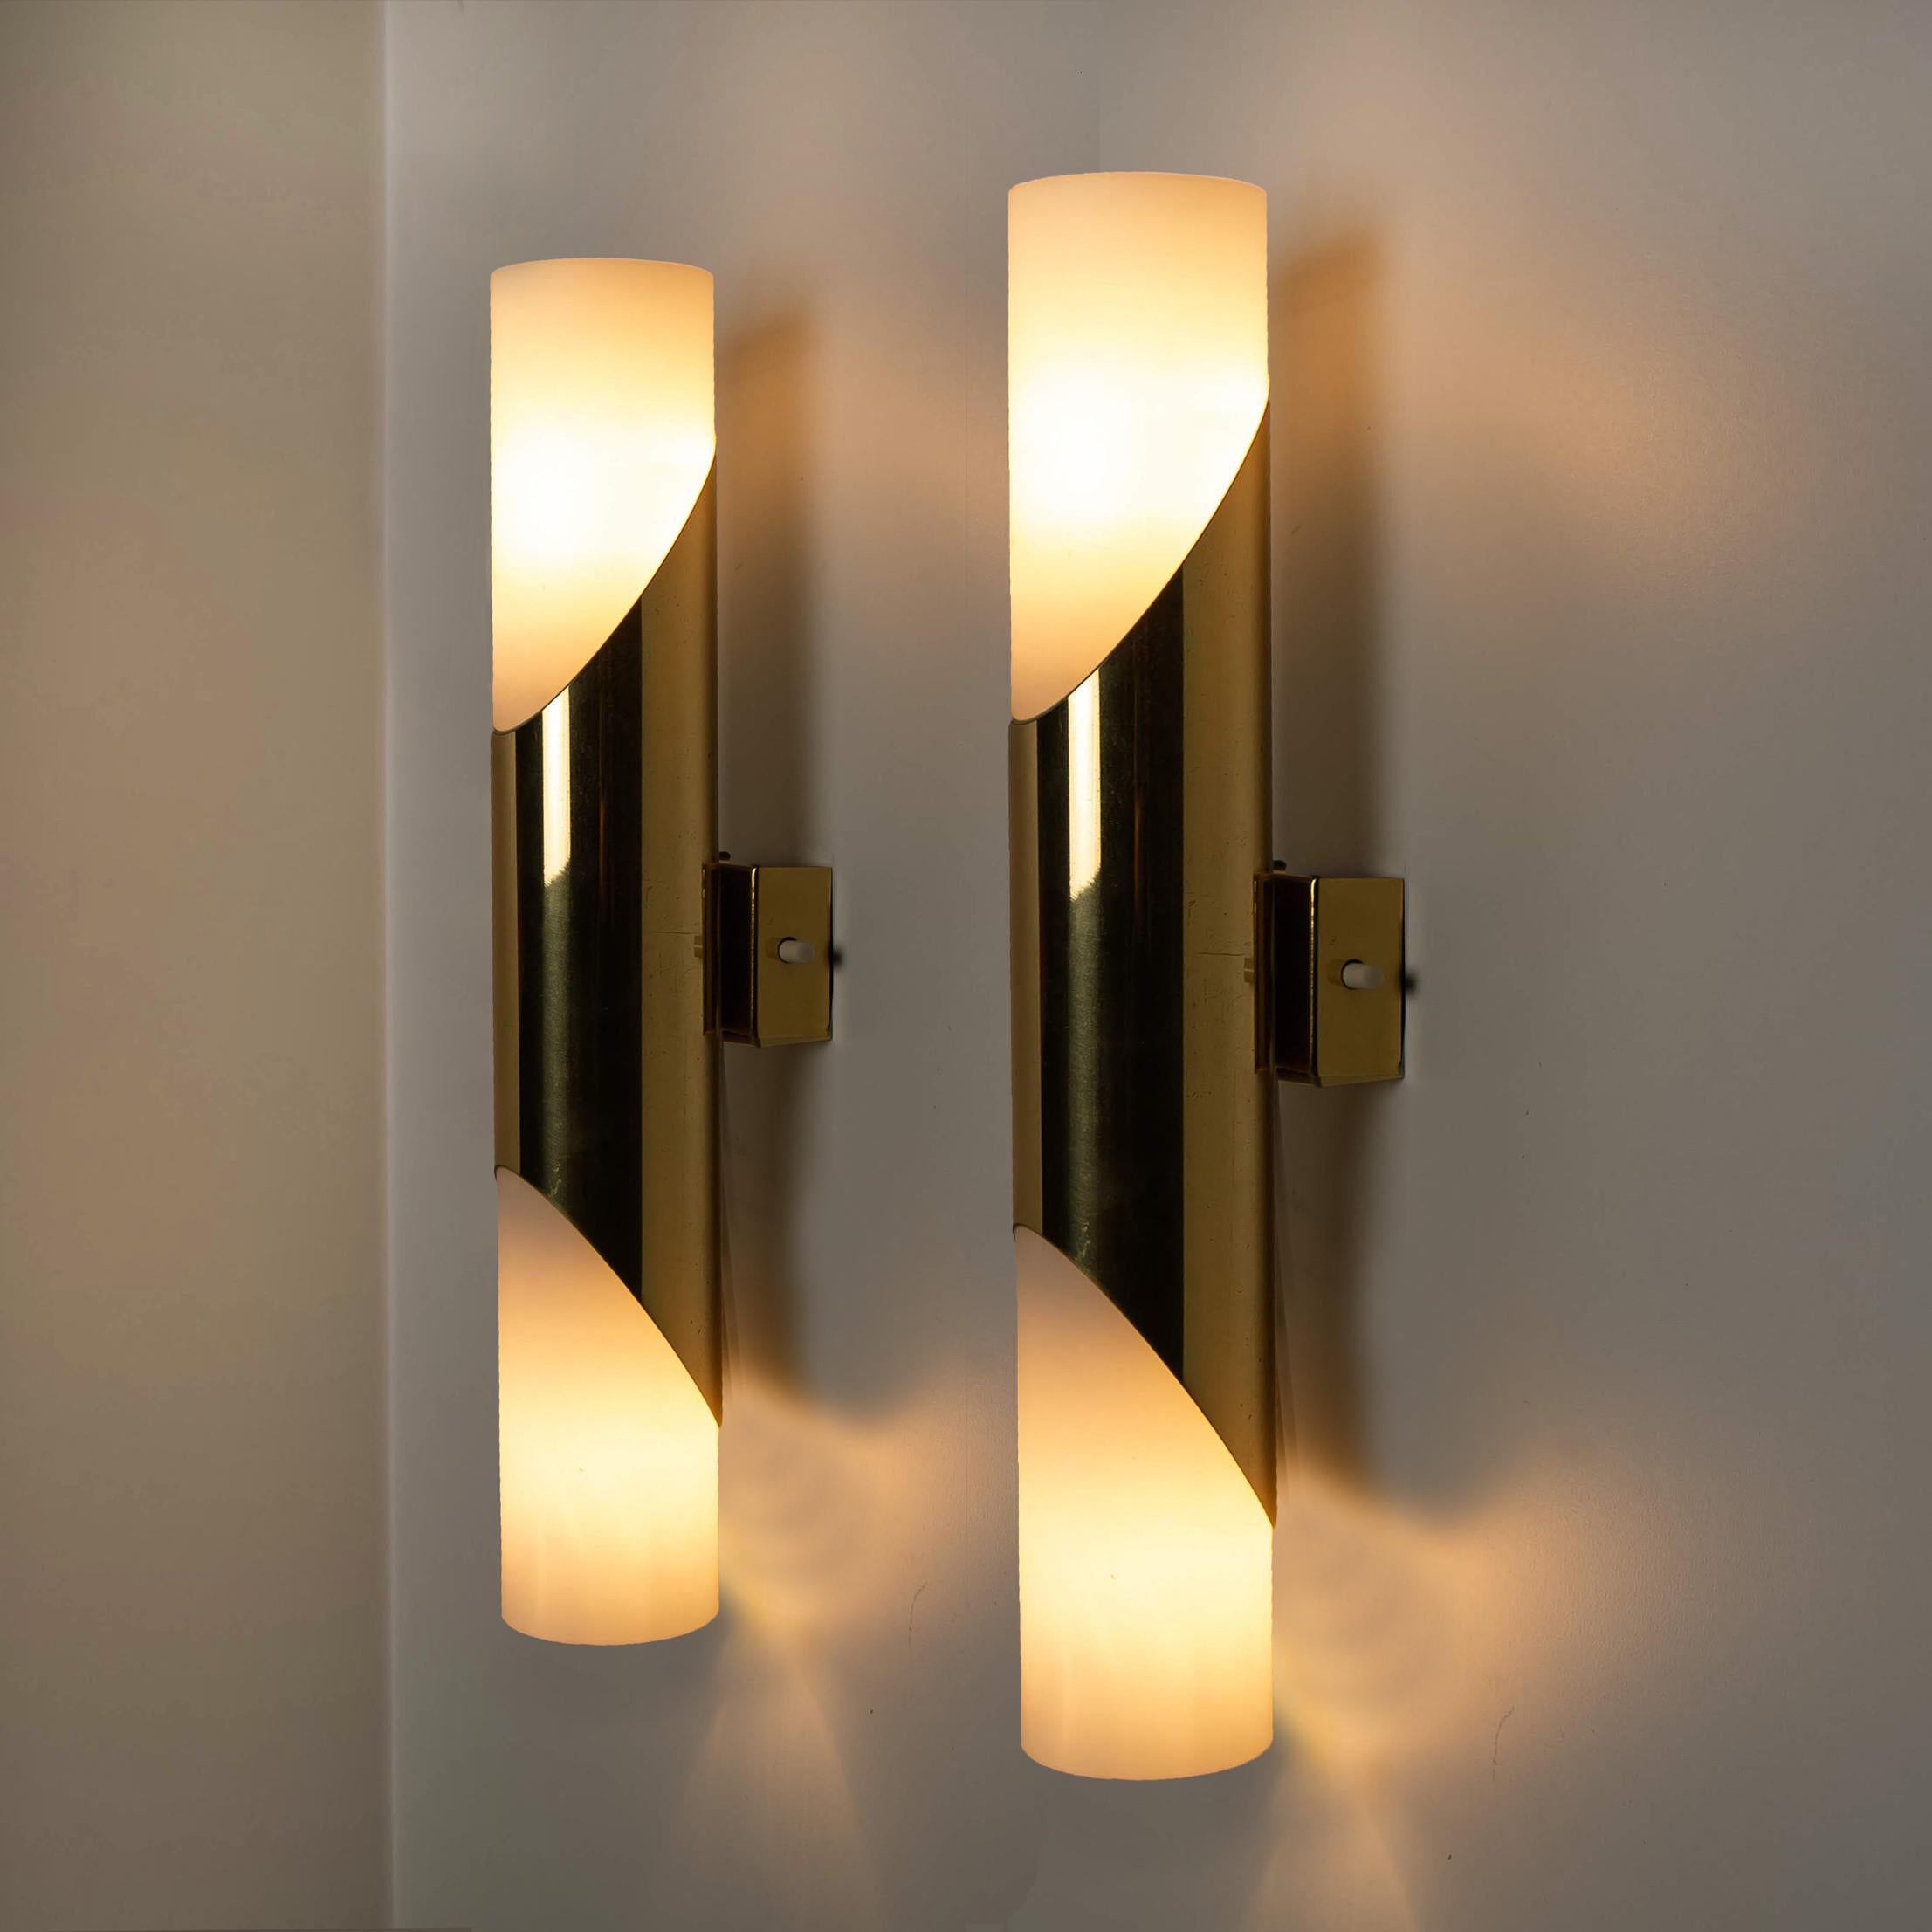 Dutch Pair of Wall Sconces or Wall Lights in the Style of RAAK Amsterdam, 1970